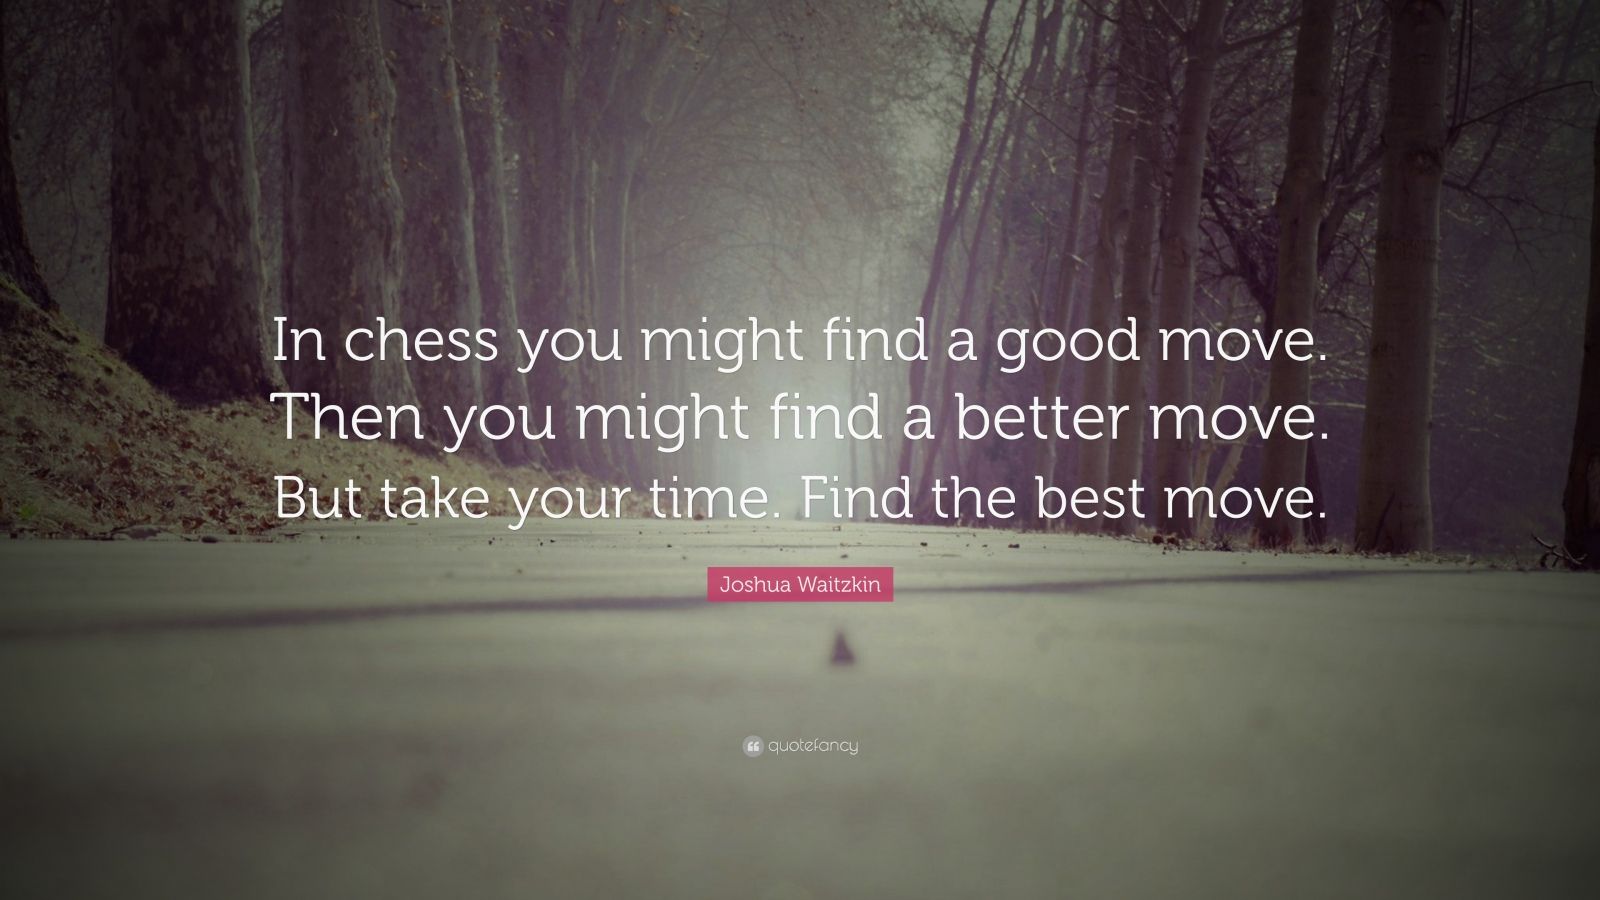 Joshua Waitzkin Quote: “In chess you might find a good move. Then you